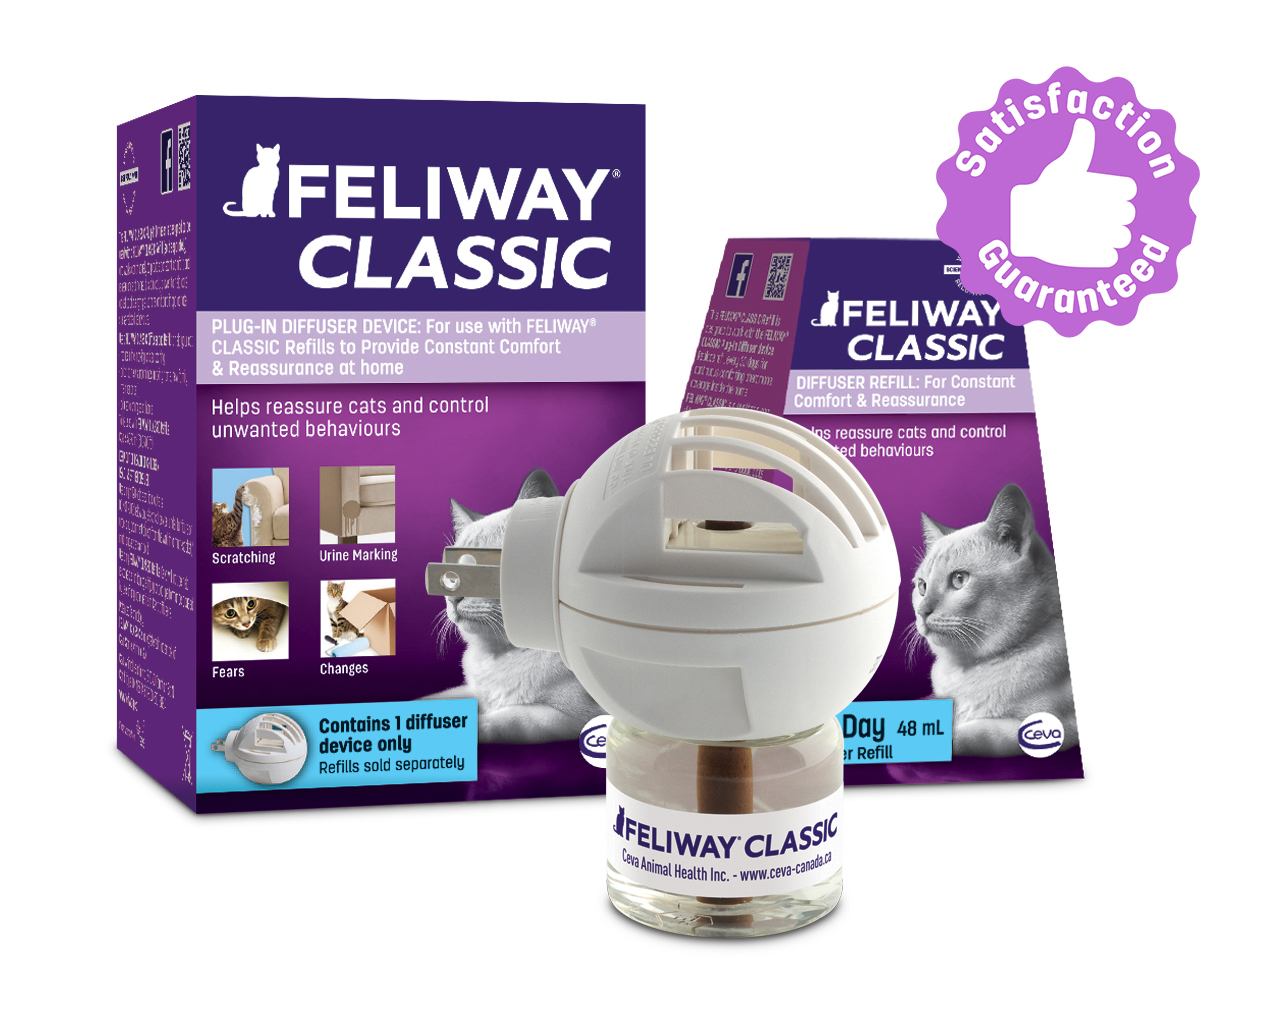 FELIWAY CLASSIC Diffuser and refill